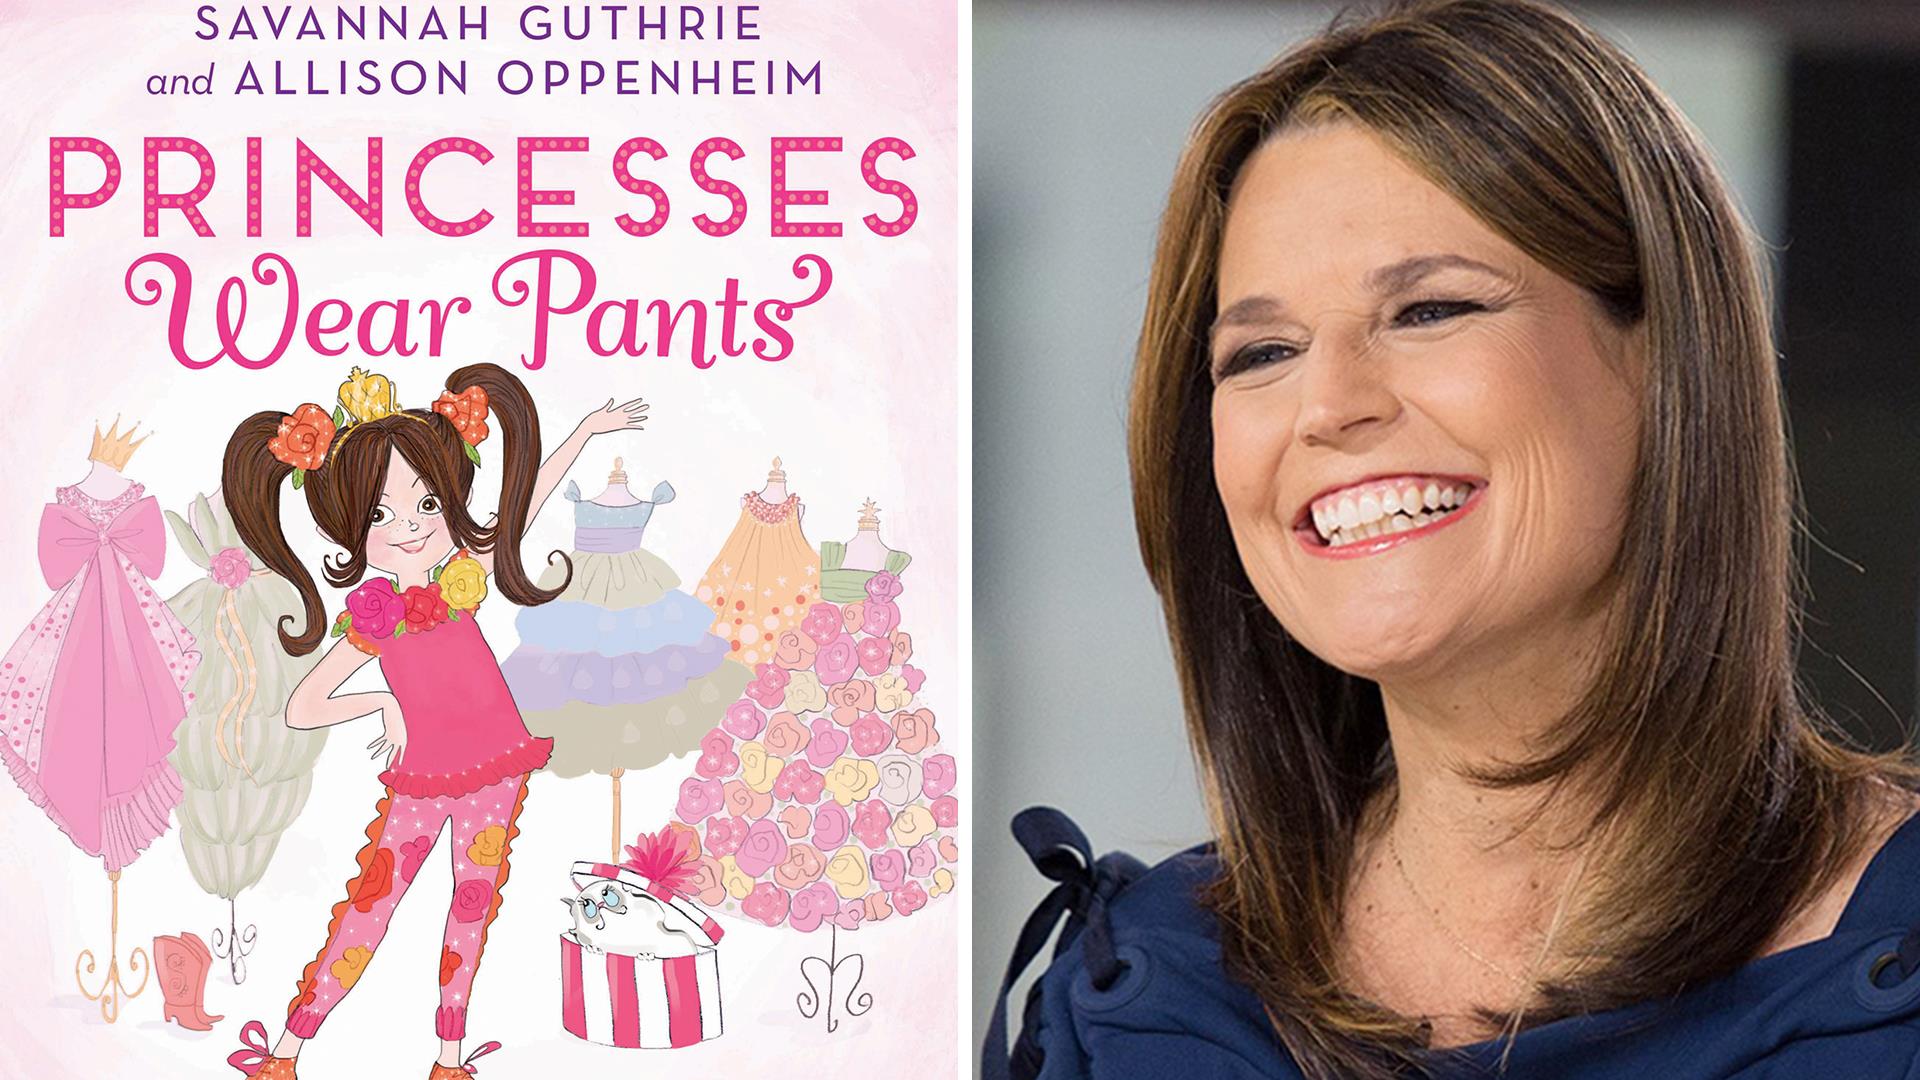 Savannah Guthrie co-wrote a children's book: Get a first look at the cover!